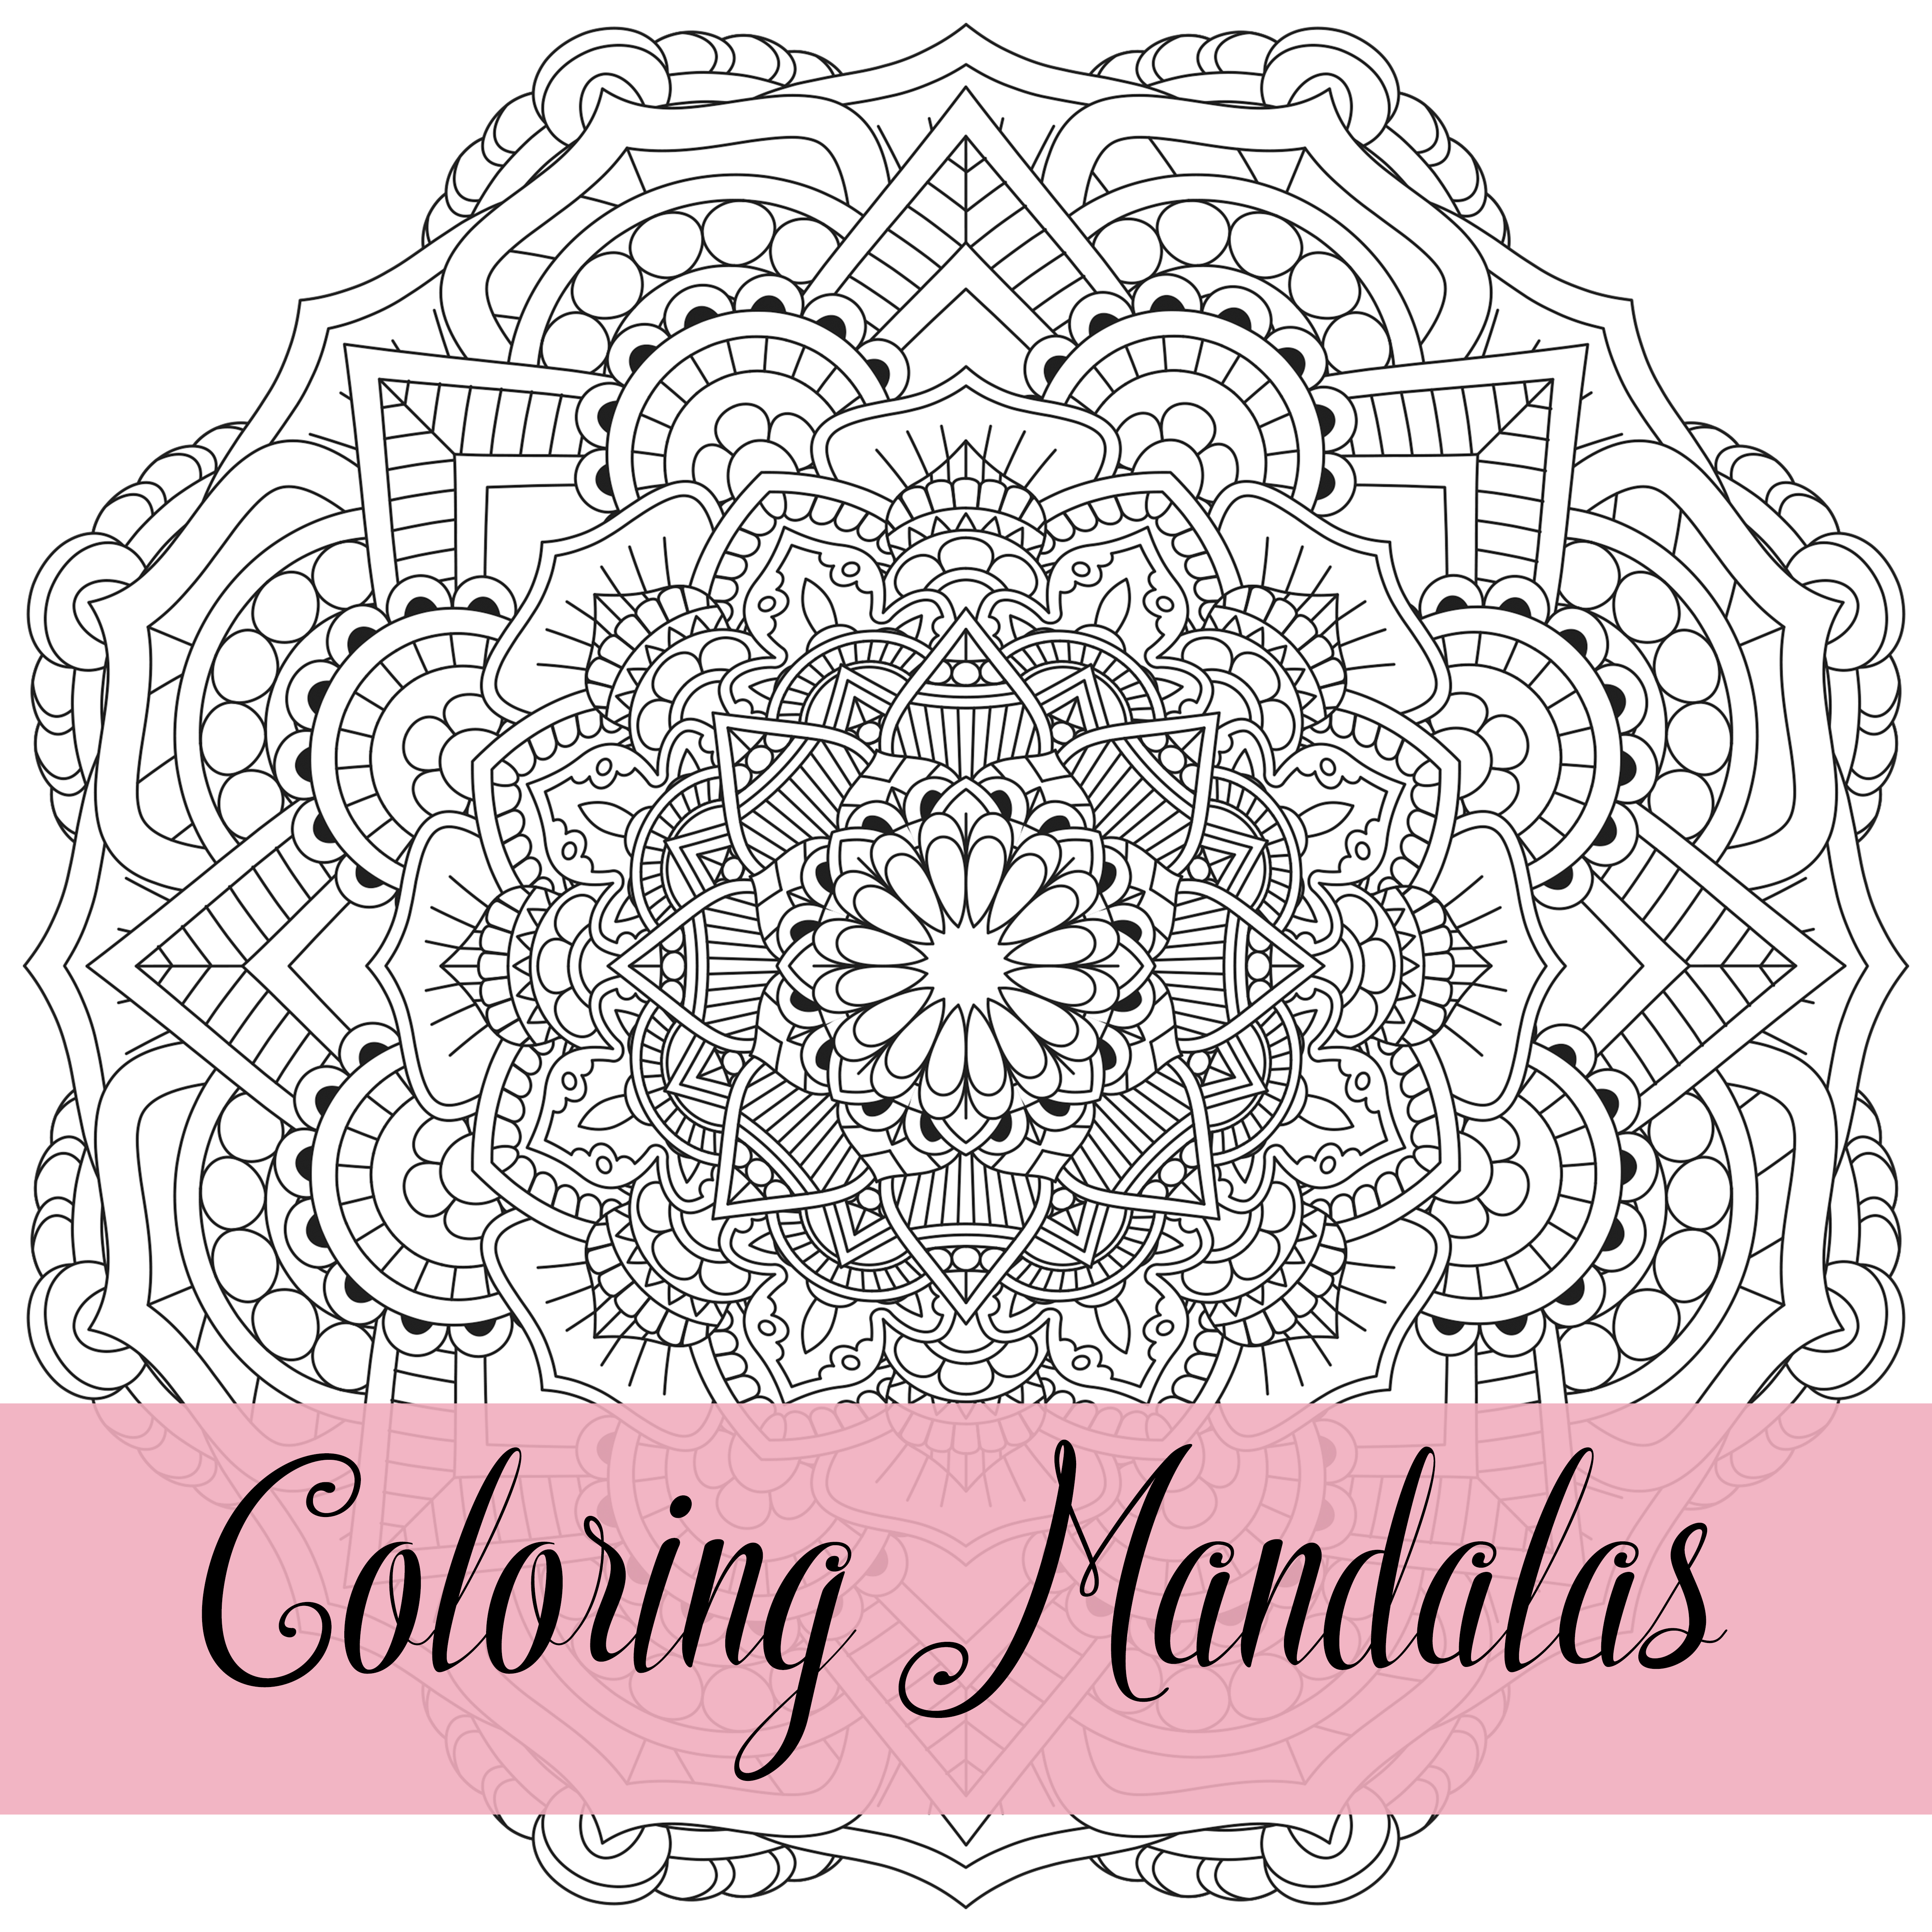 Make Money with Coloring Books – Grab These 25+ Printable Mandalas for Coloring and Designs